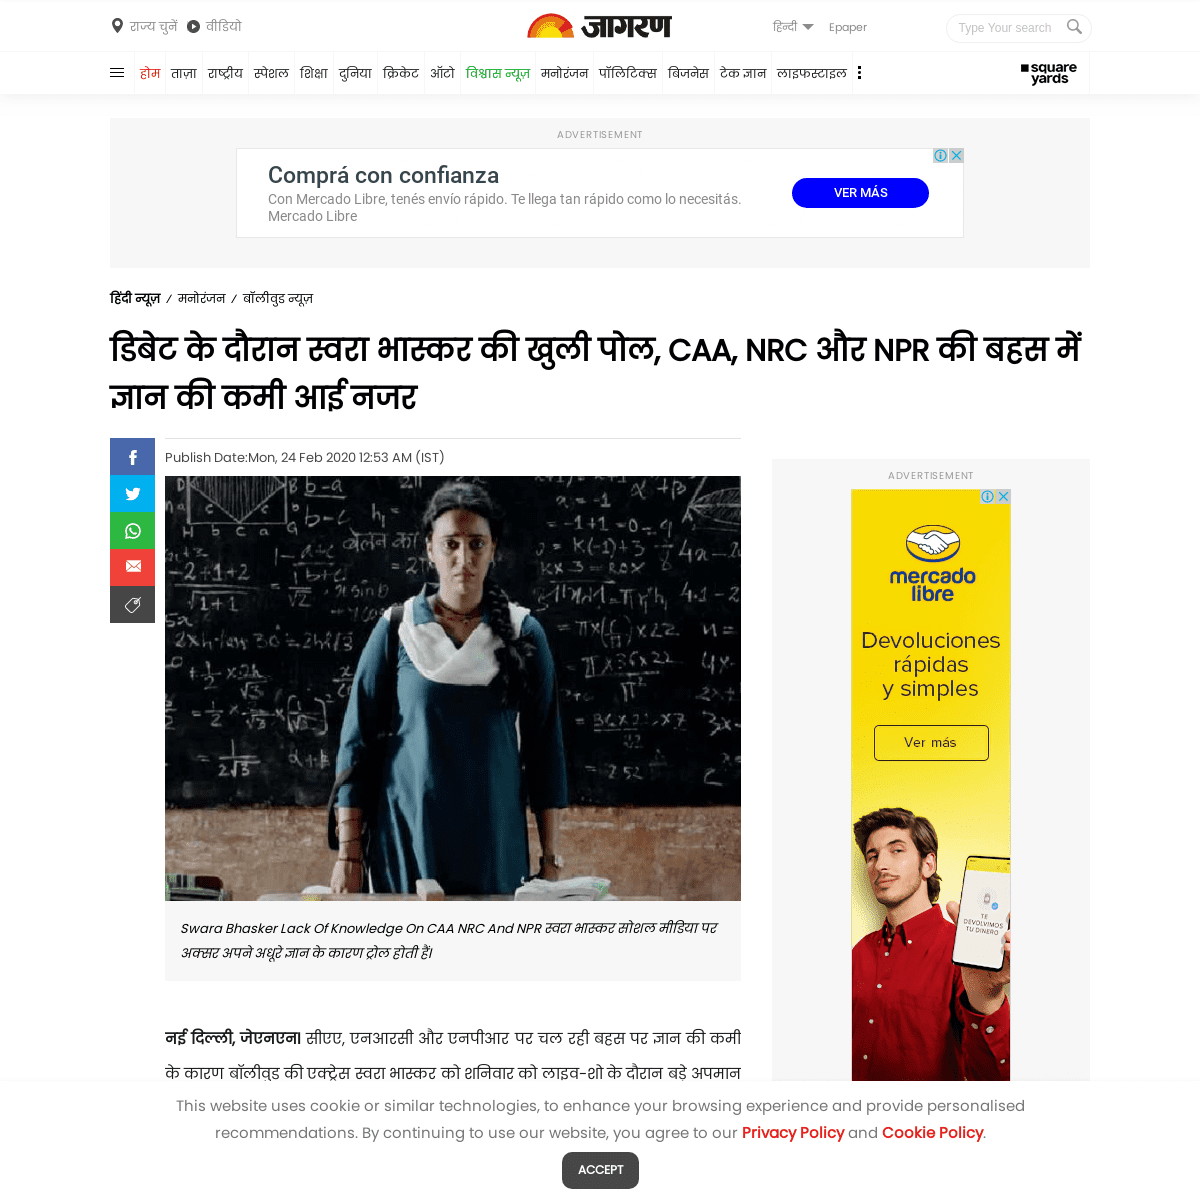 A complete backup of www.jagran.com/entertainment/bollywood-watch-swara-bhasker-got-exposed-for-her-lack-of-knowledge-on-caa-nrc